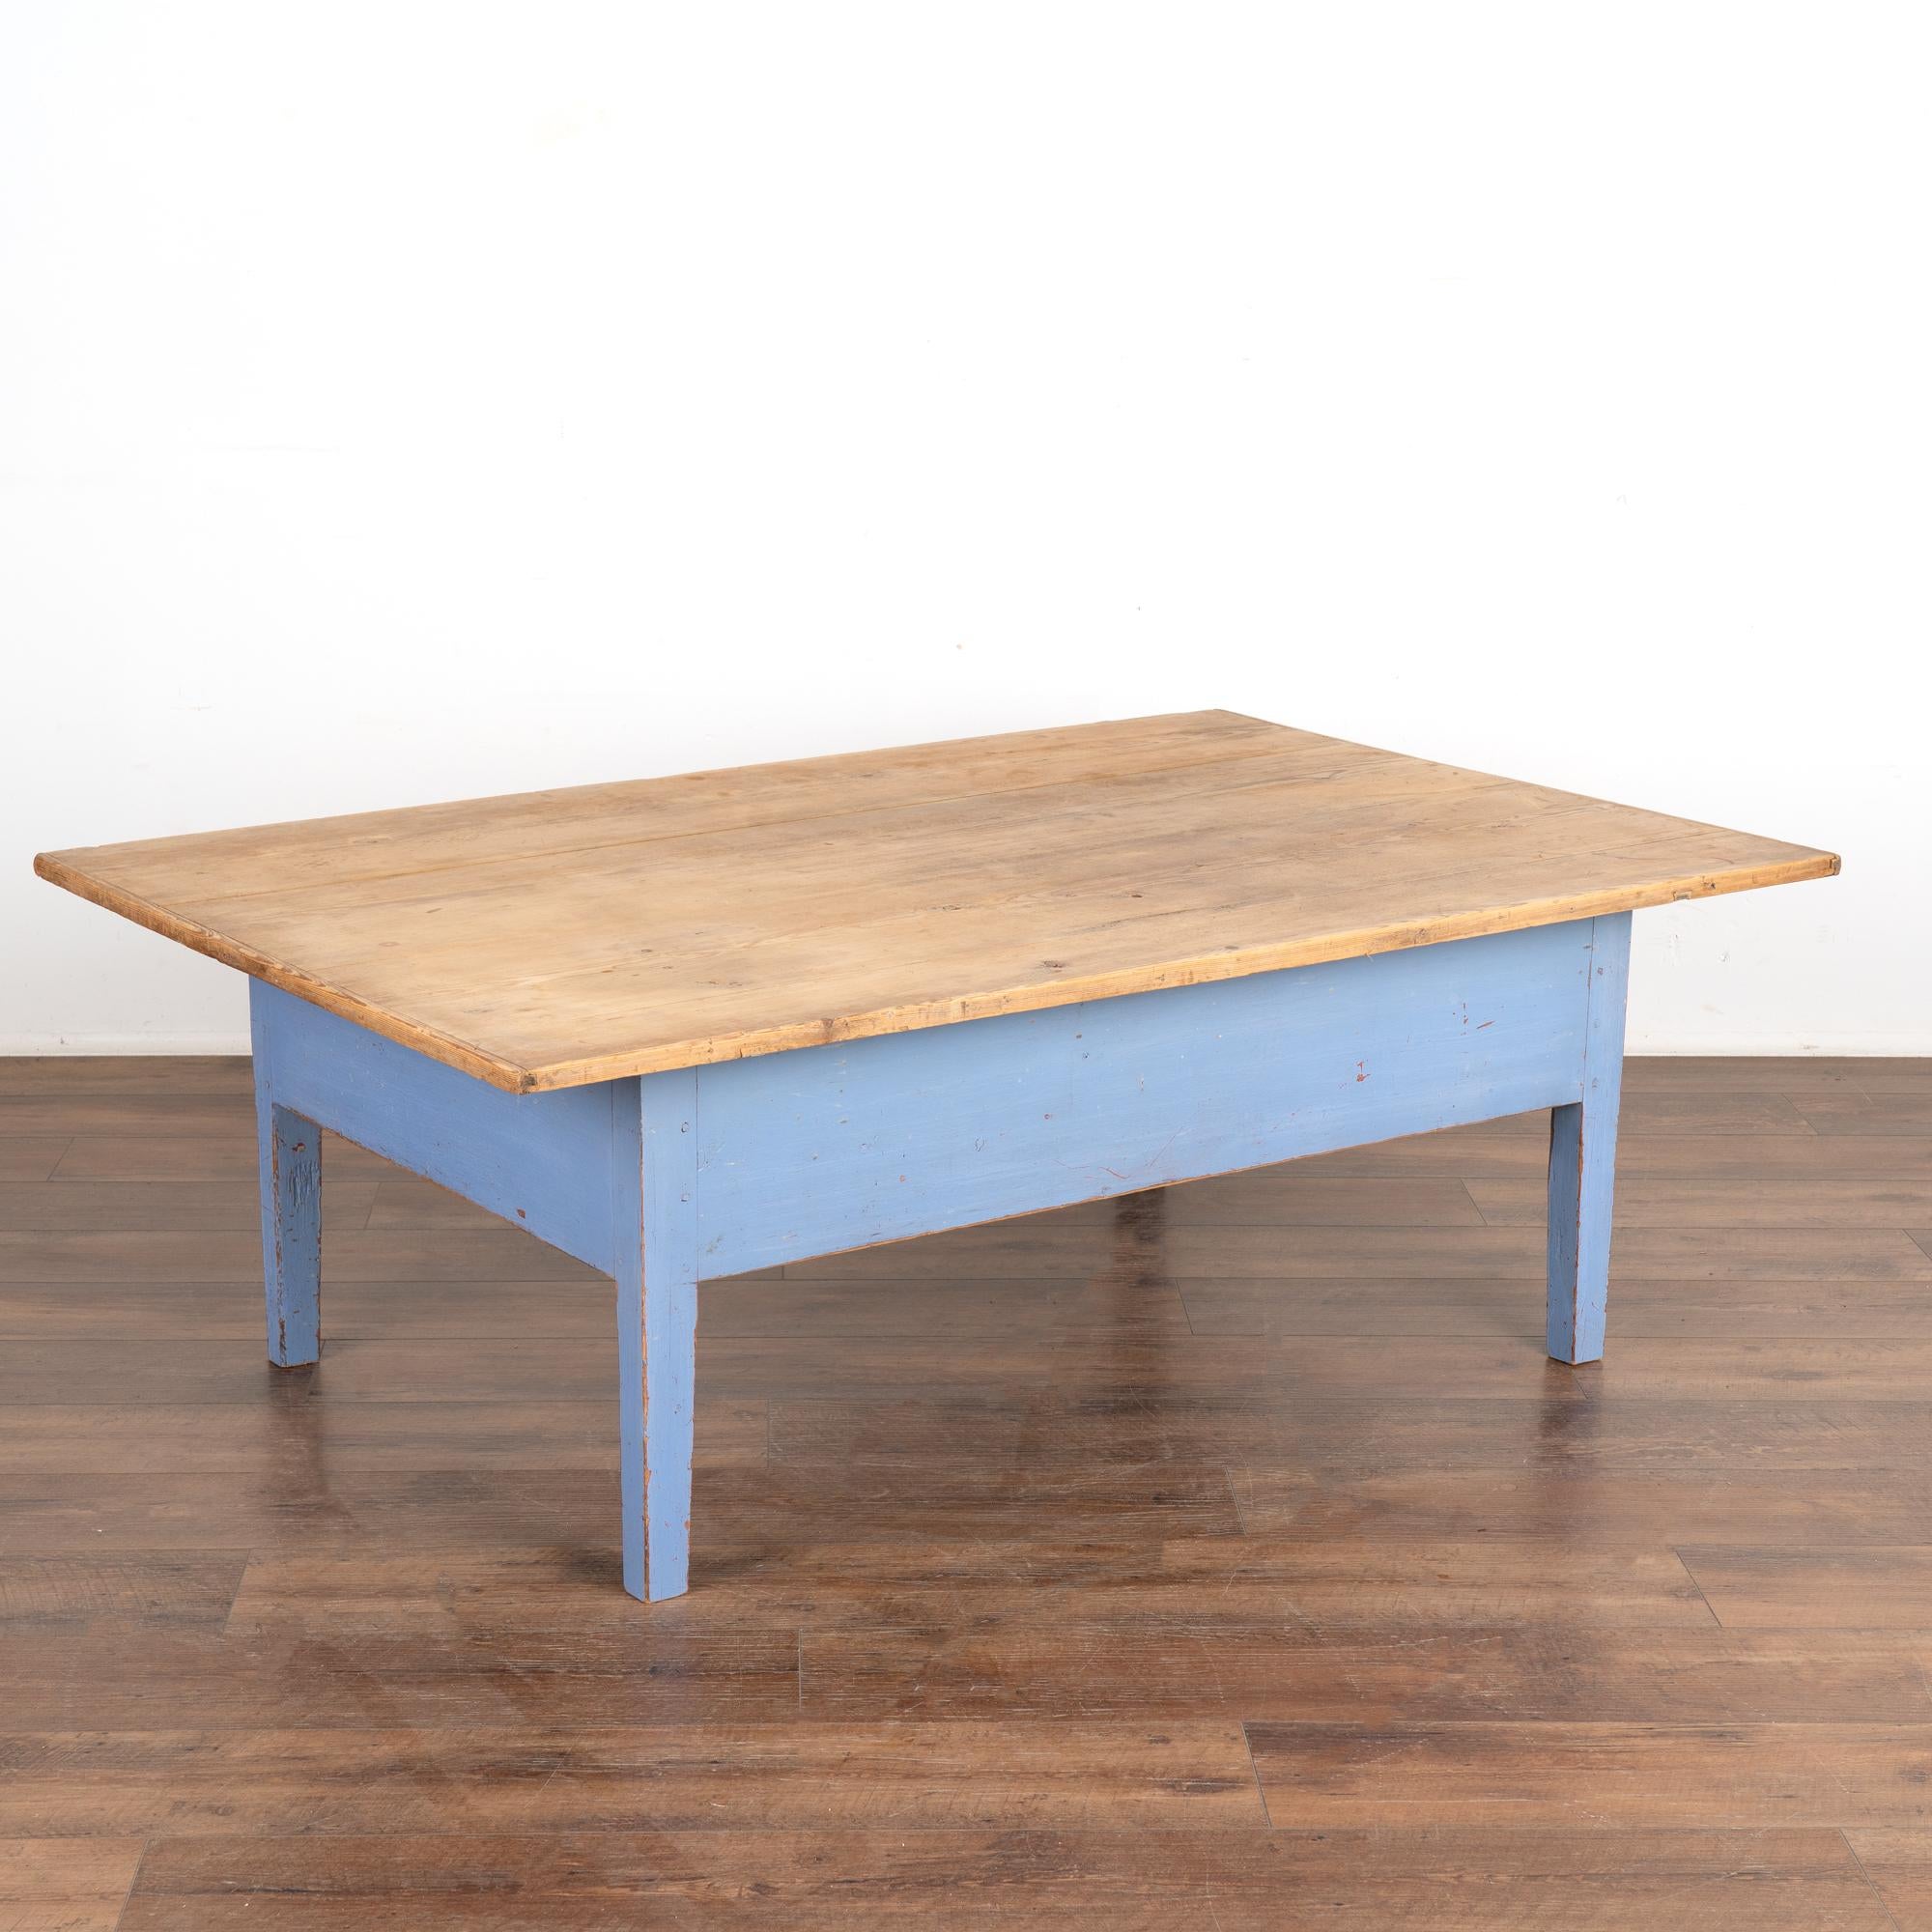 Rustic Blue Painted Pine Coffee Table With Two Drawers, Sweden circa 1860-80 3